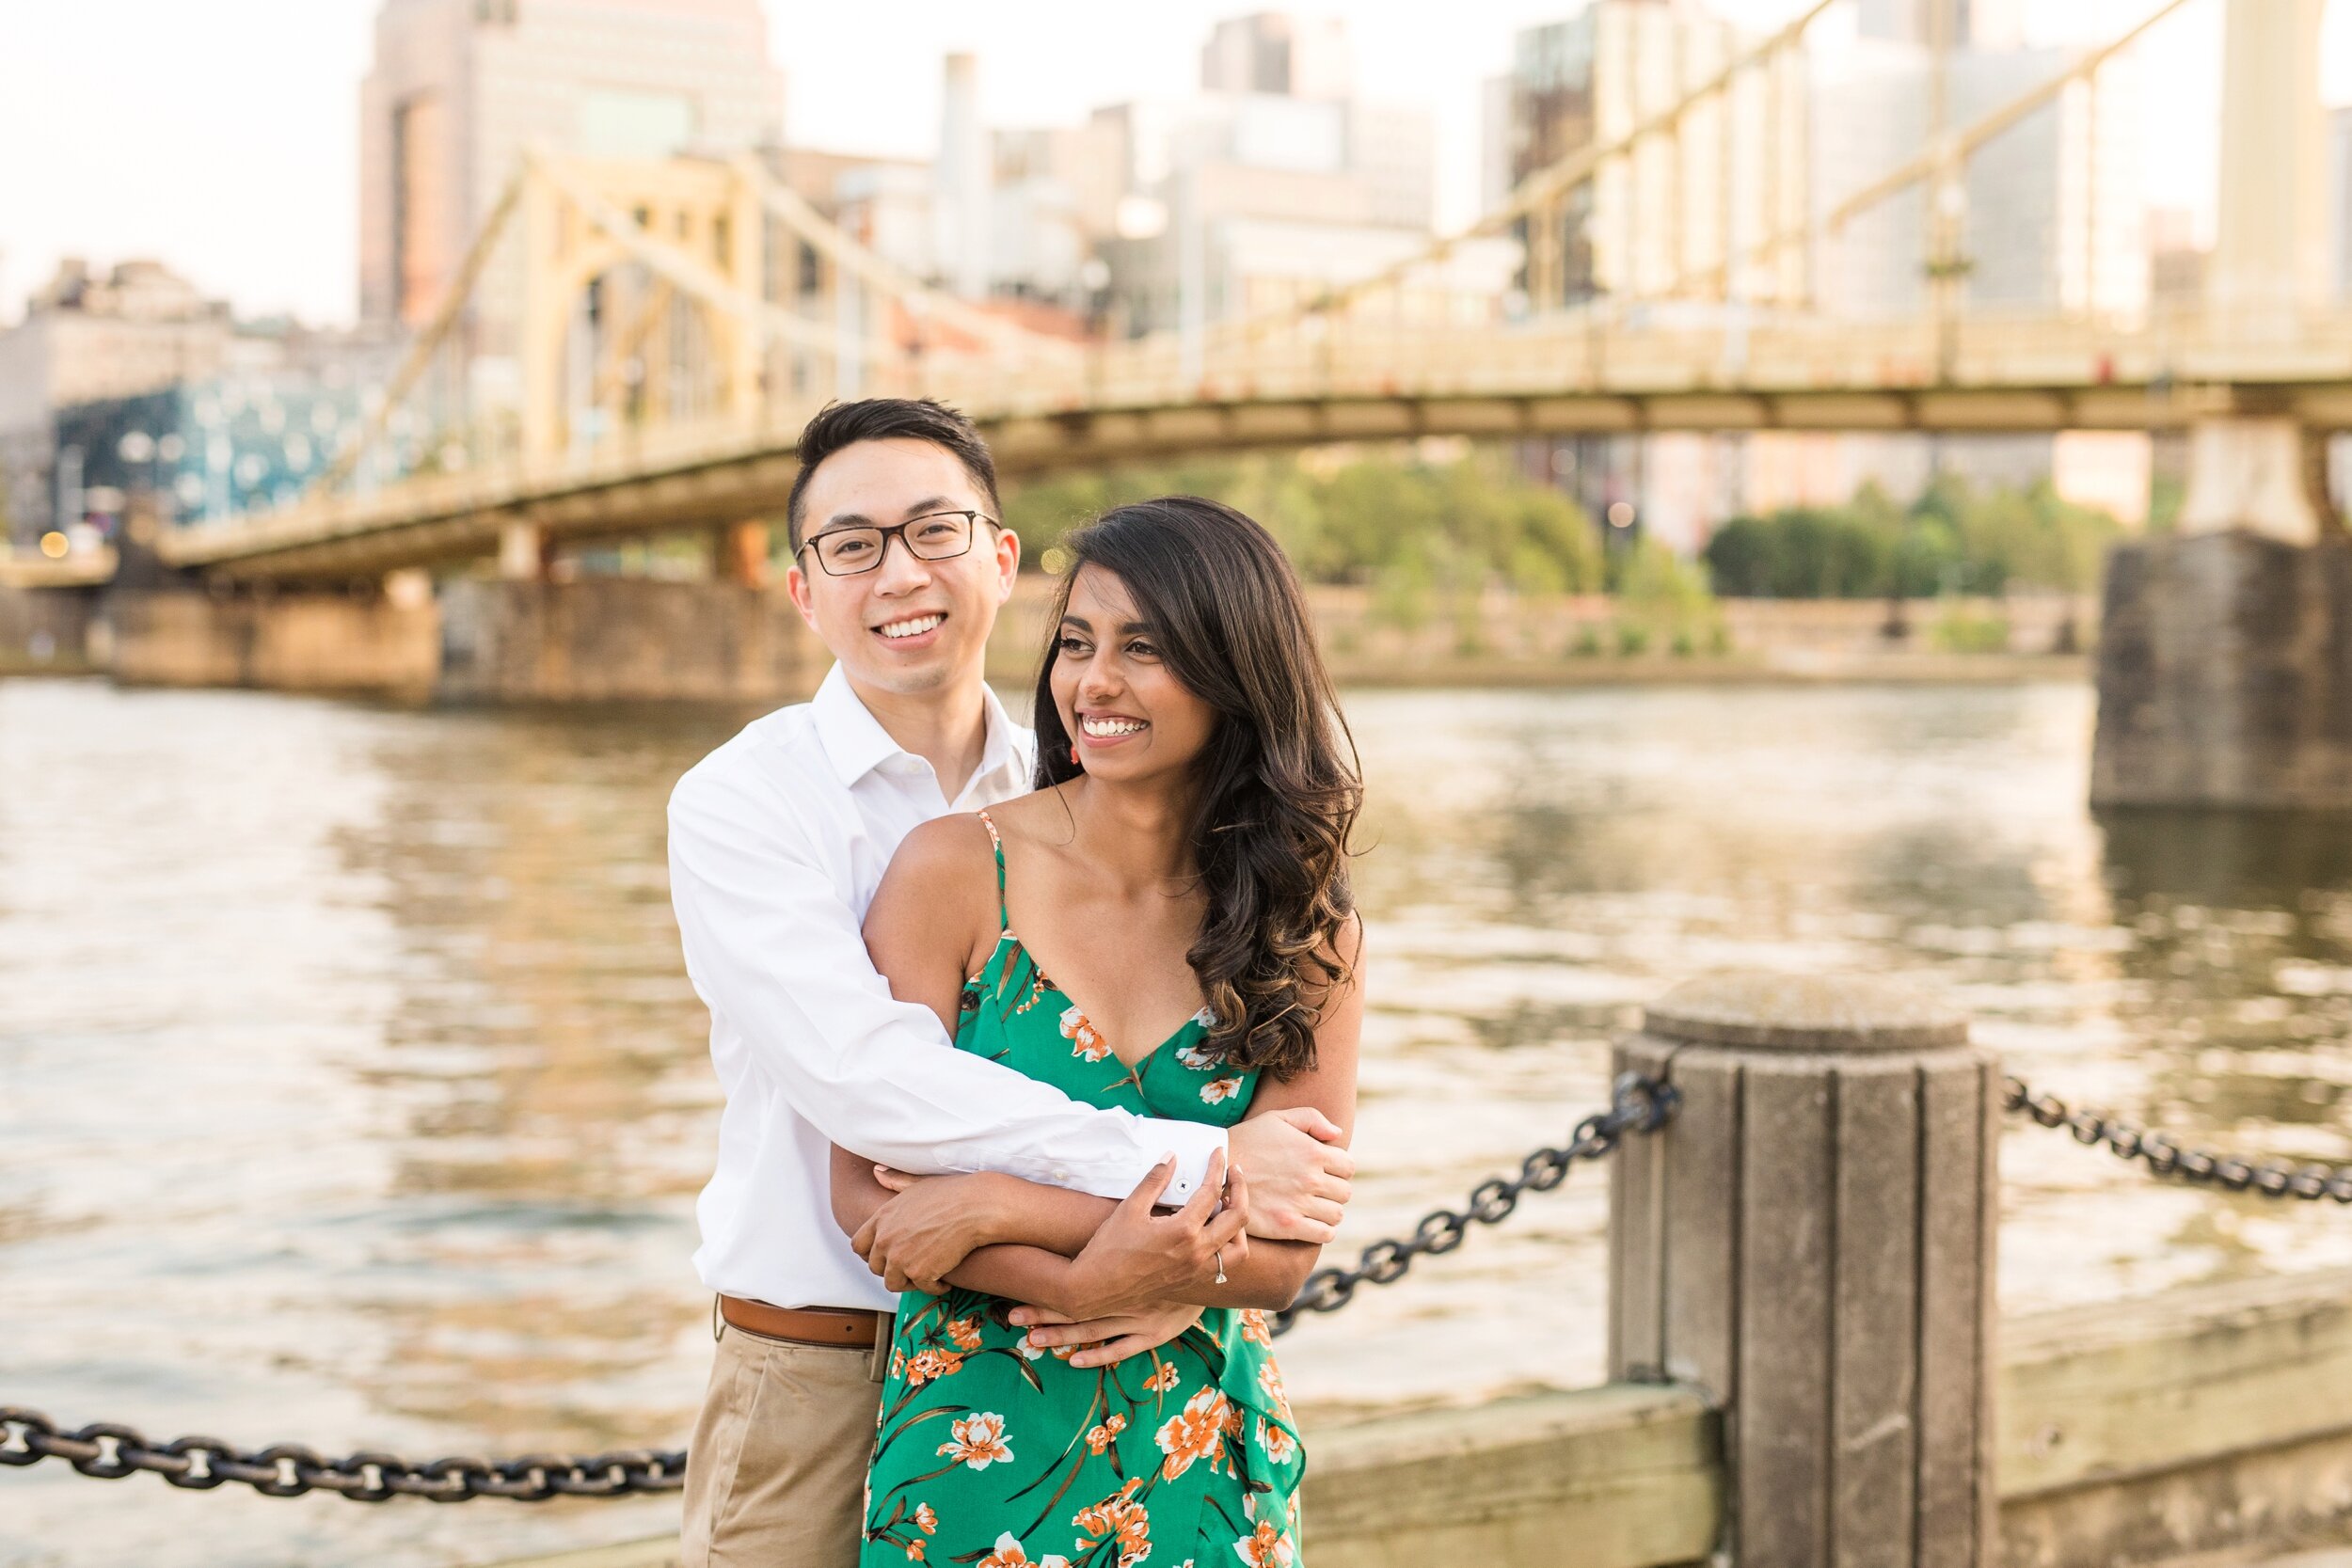 mexican war streets pittsburgh engagement photos, north shore pittsburgh engagement photos, allegheny commons park photos, pittsburgh engagement photographer, zelienople photographer